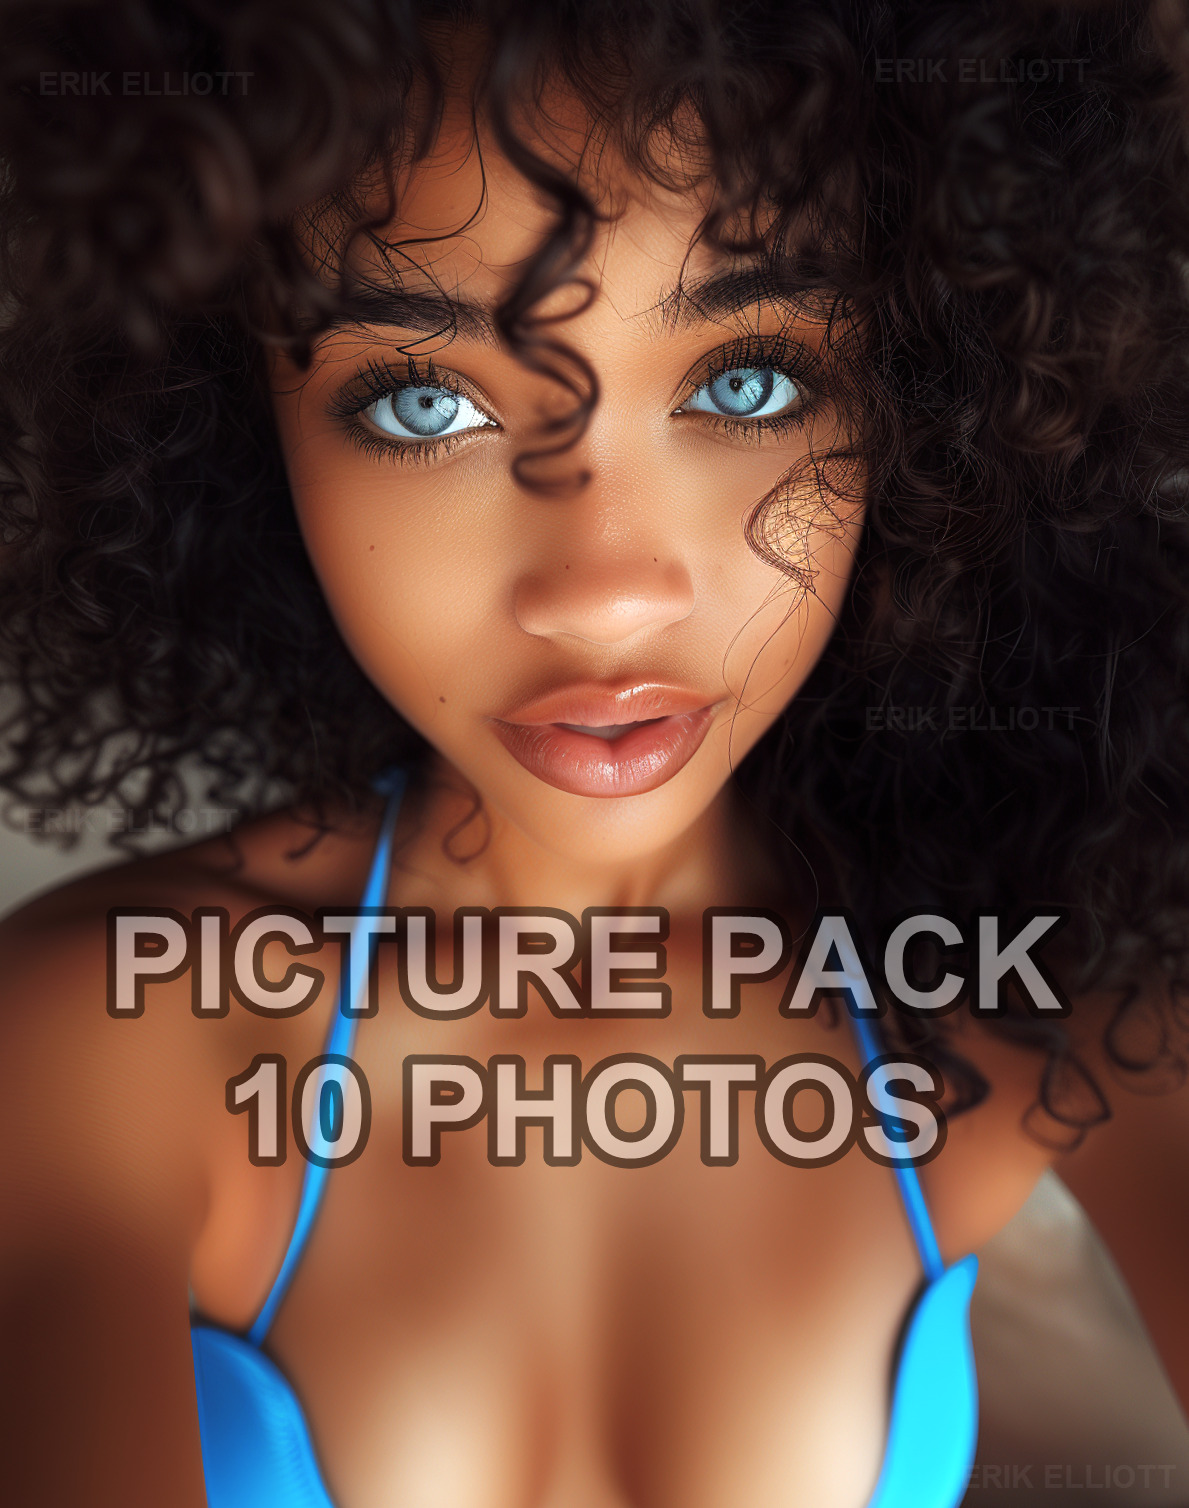 10 PHOTOS 5x7 Sexy Picture Pack Gorgeous Women Busty Art Photography Hot Girls